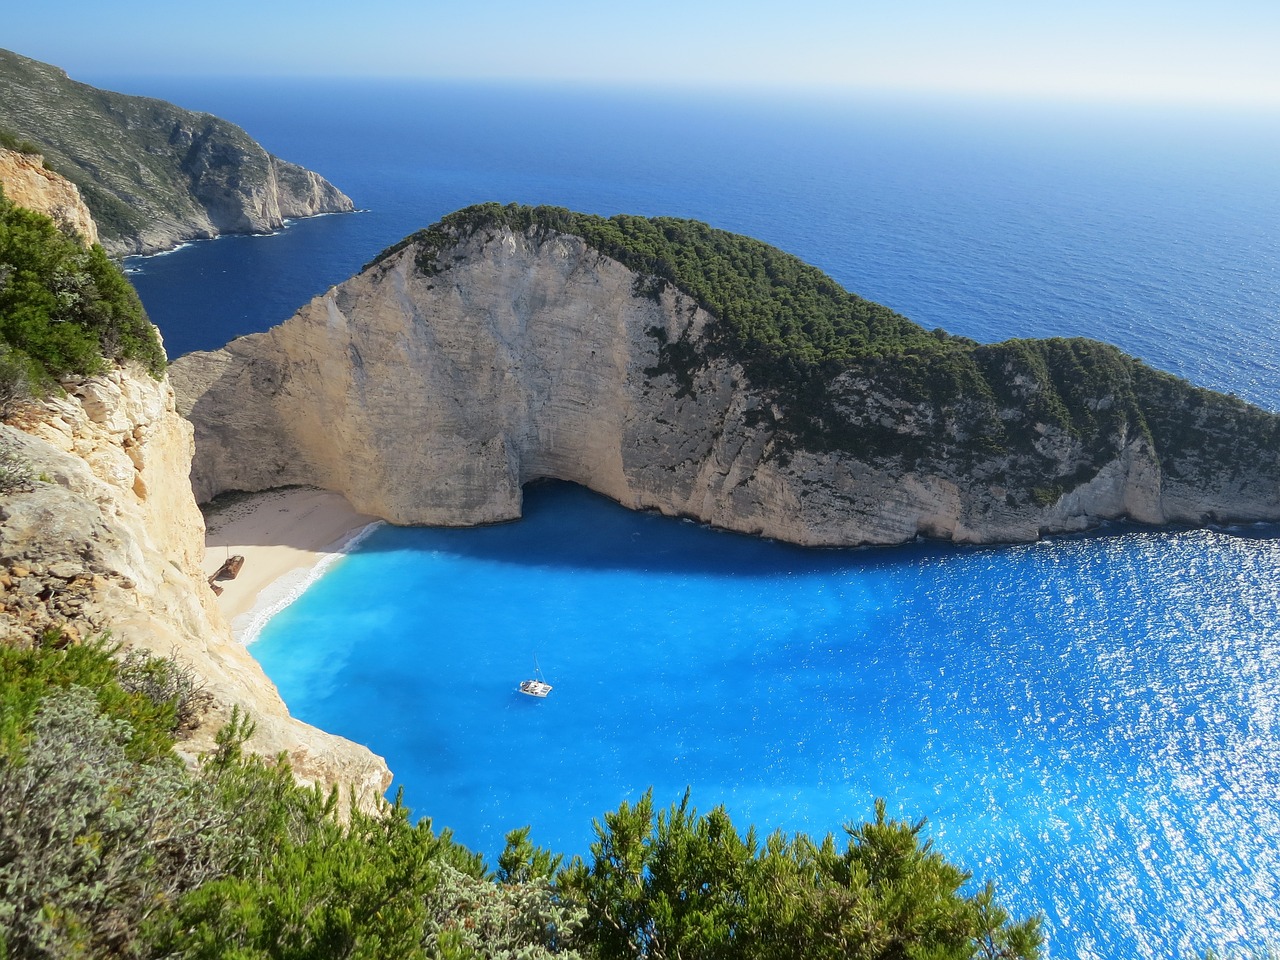 10 Days Romantic Honeymoon Exploring Beaches, Historical Sites, and Gourmet Dining in Greece